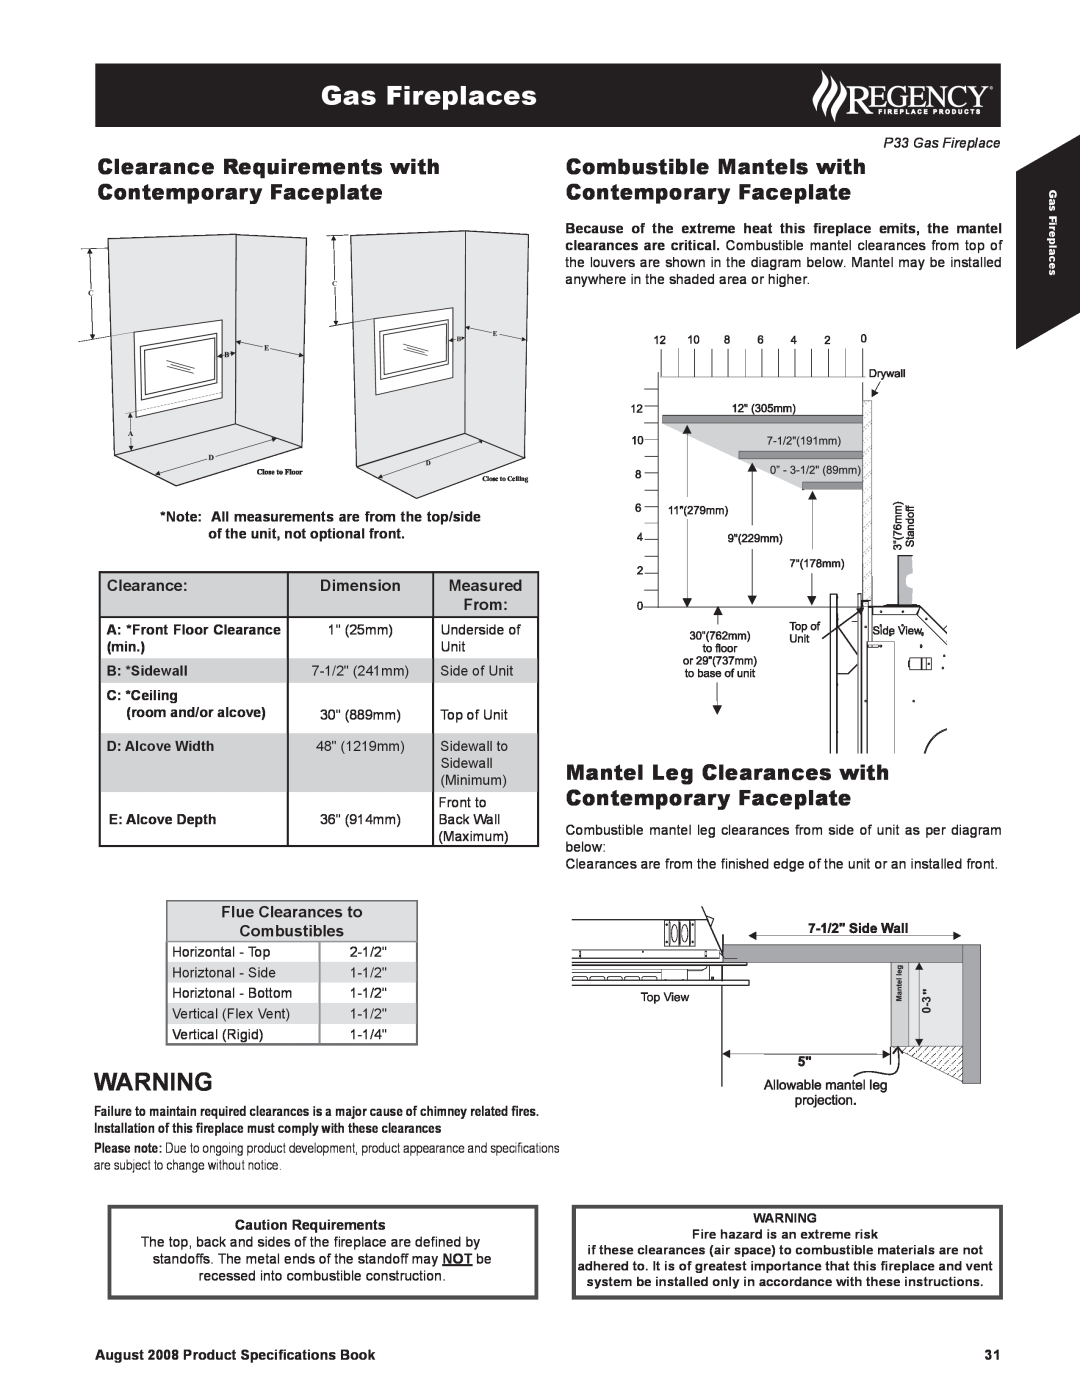 Regency 510-994 Clearance Requirements with, Combustible Mantels with, Contemporary Faceplate, Gas Fireplaces, Dimension 